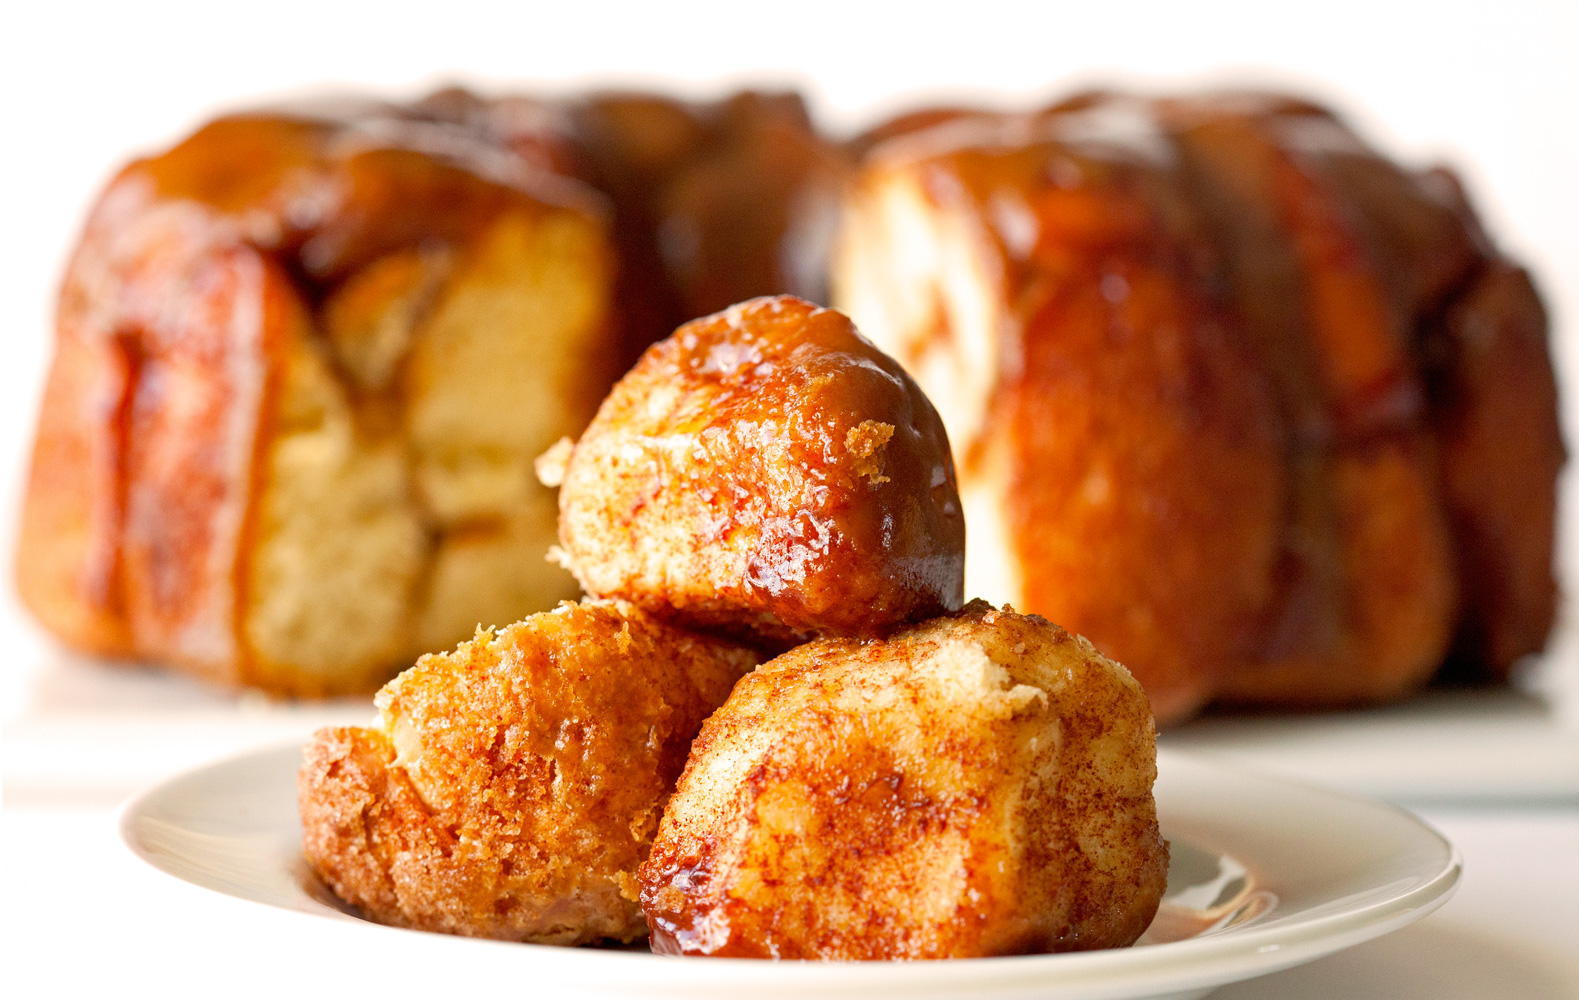 monkey bread with salted caramel sauce, see more at //homemaderecipes.com/cooking-101/10-homemade-bread-recipes/